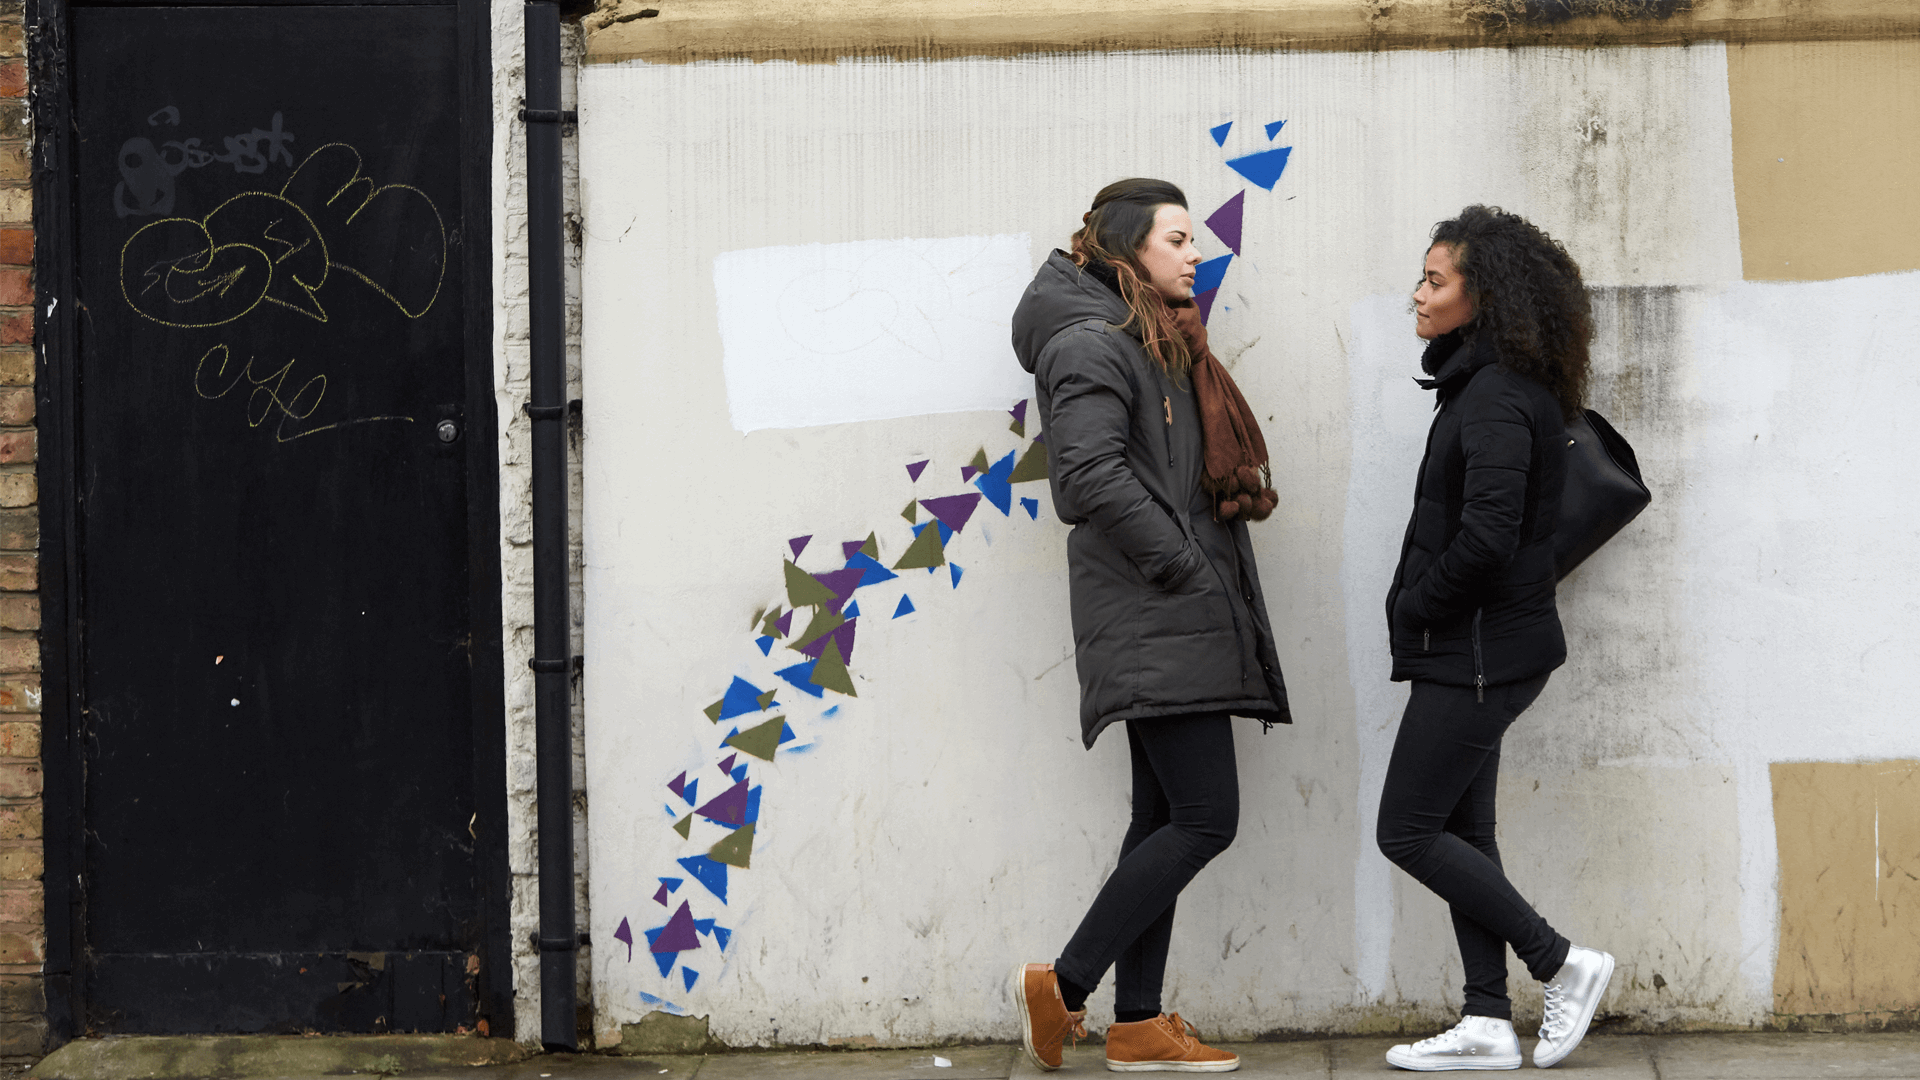 Two girls wearing black jackets are talking while standing against a wall decorated with blue, purple and green graffiti patterns.